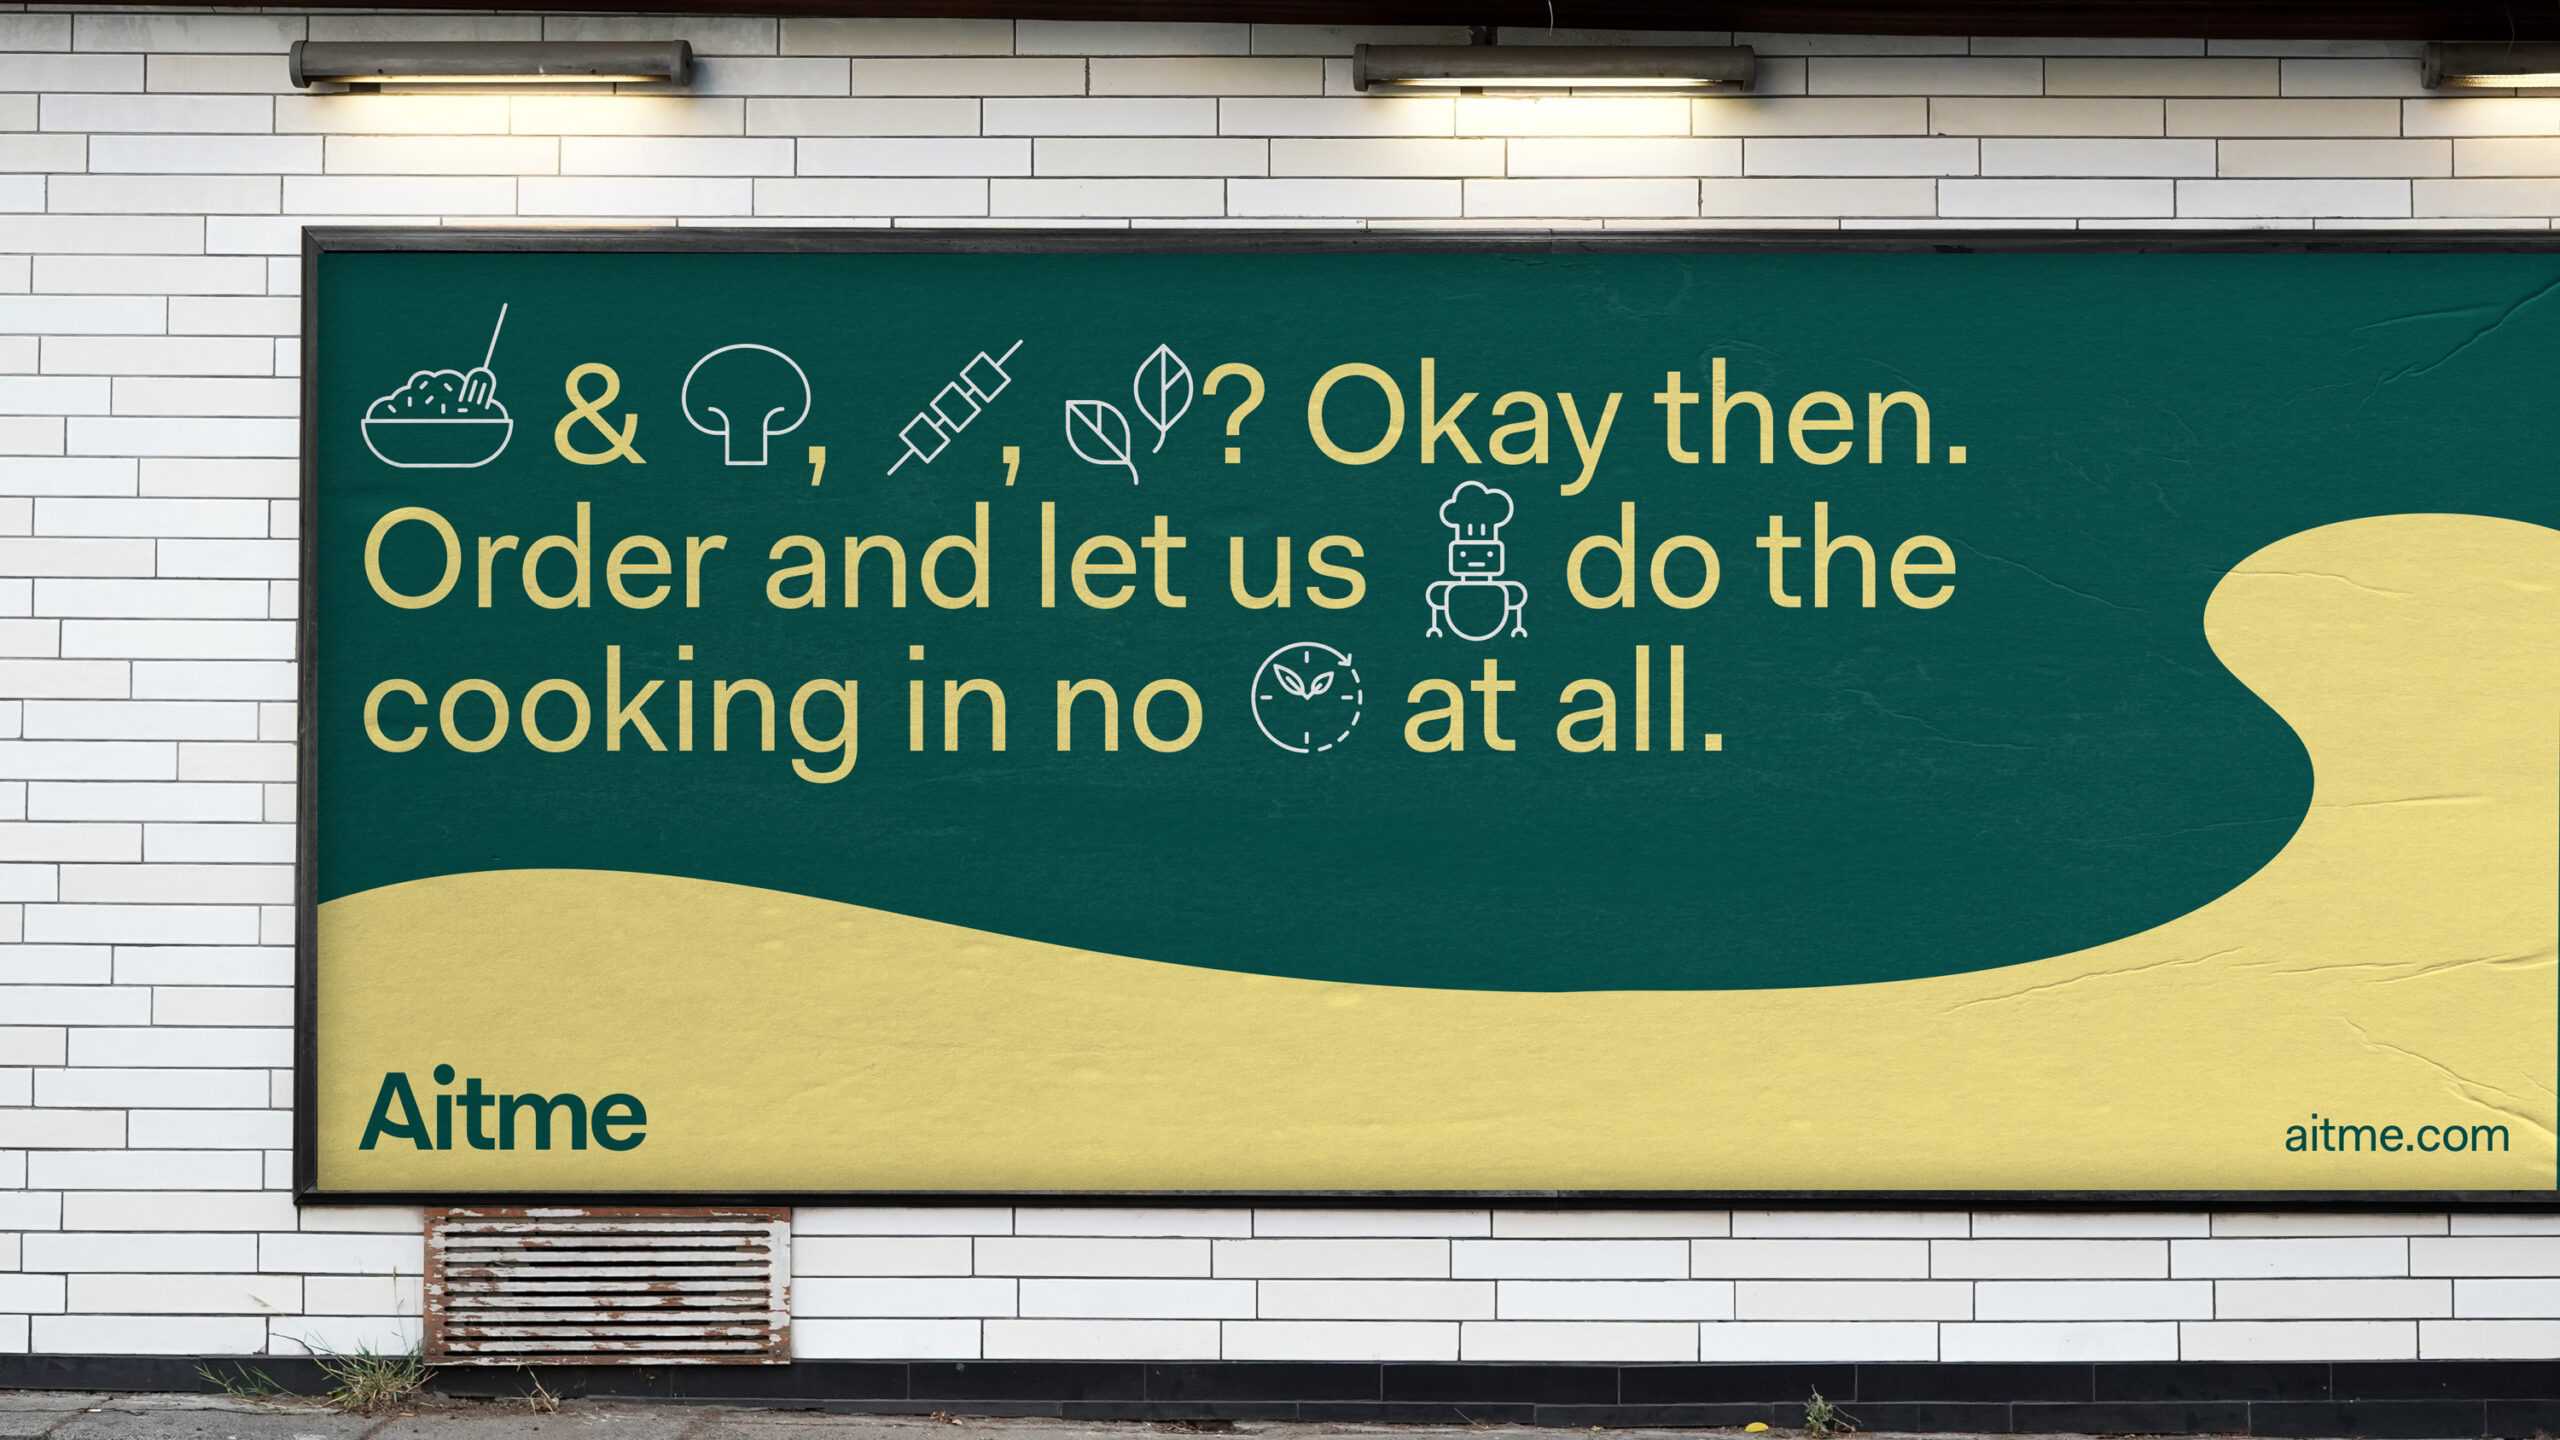 Billboard with text and icons for Aitme